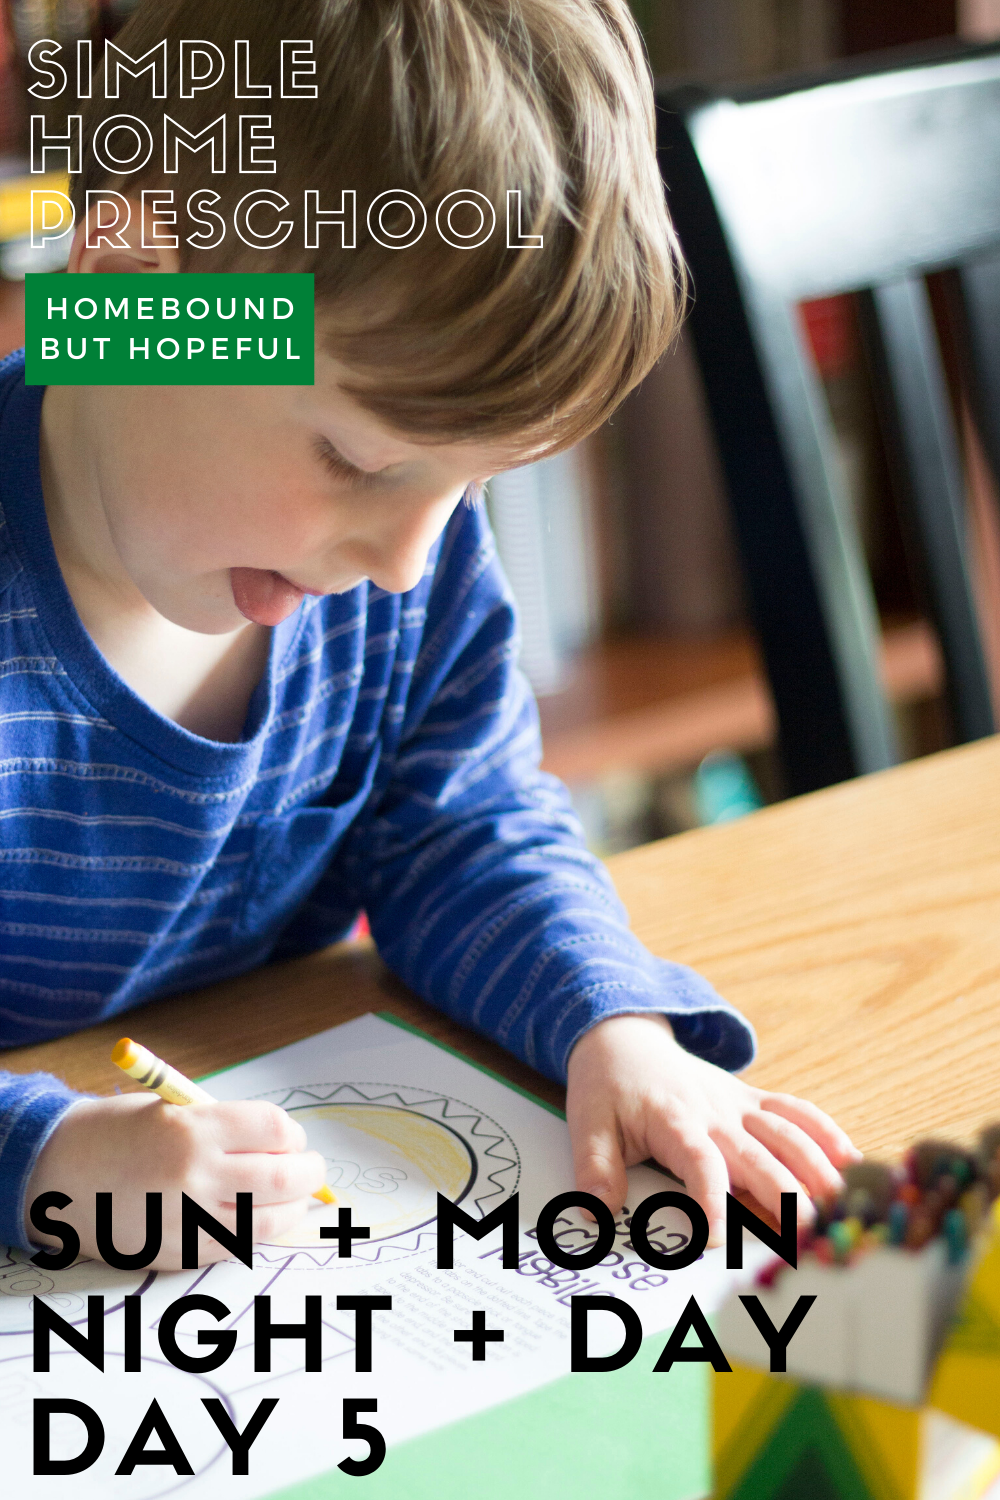 We had a fun - and very crafty - day learning about eclipses together during home preschool. Don't miss all the great ideas! #homepreschool #preschooler #preschoollife #homeschoolmom